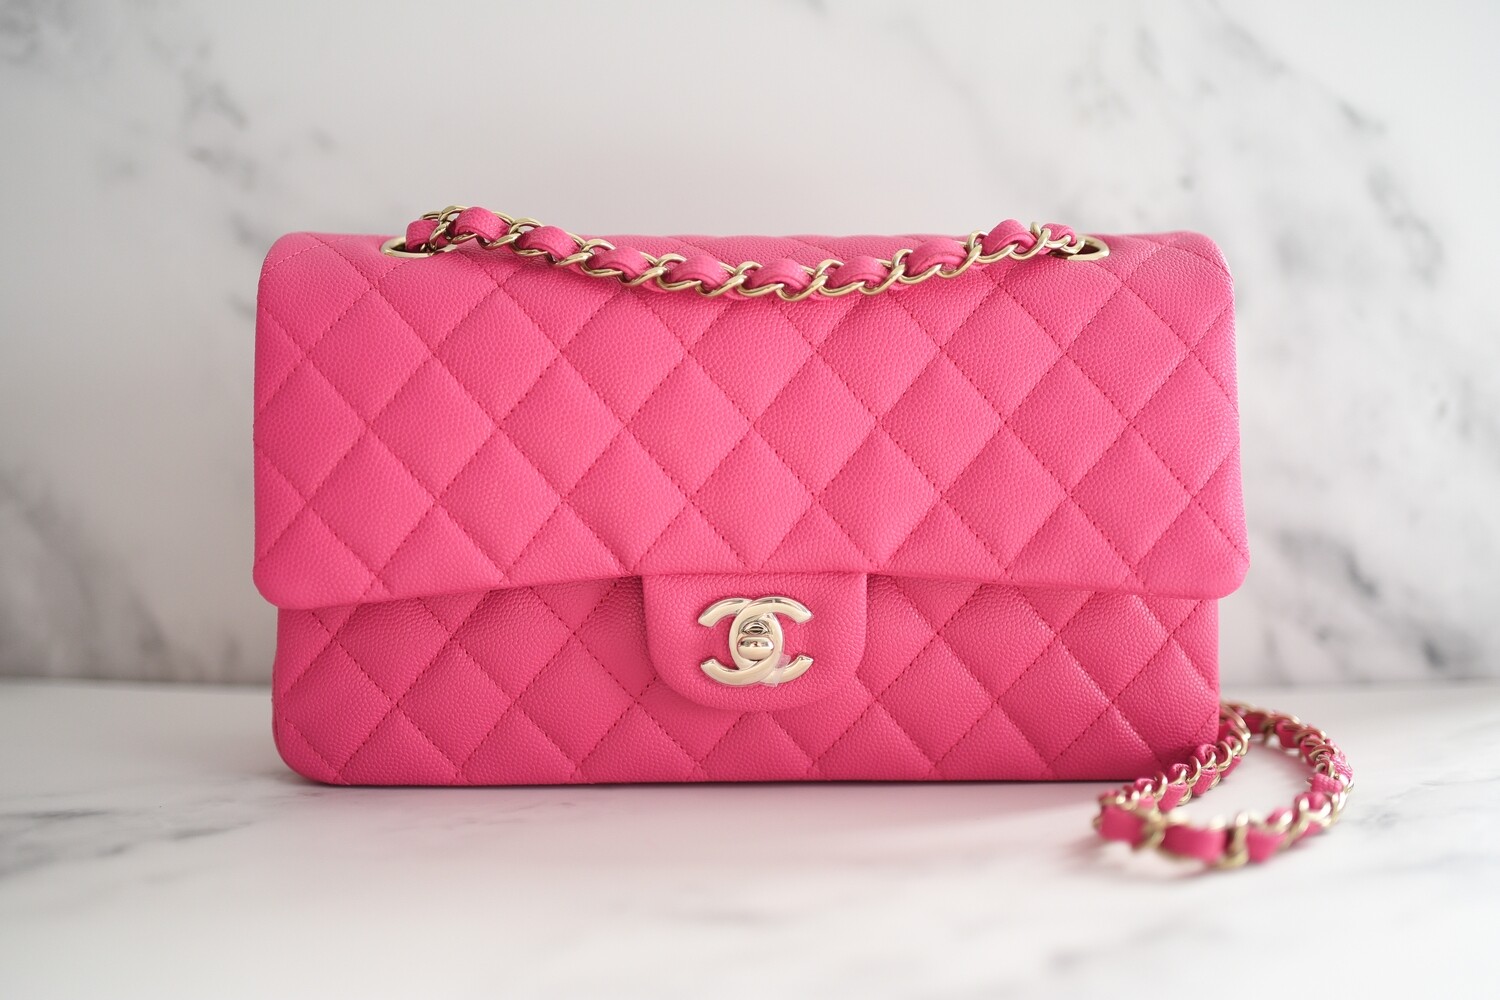 pink chanel flap